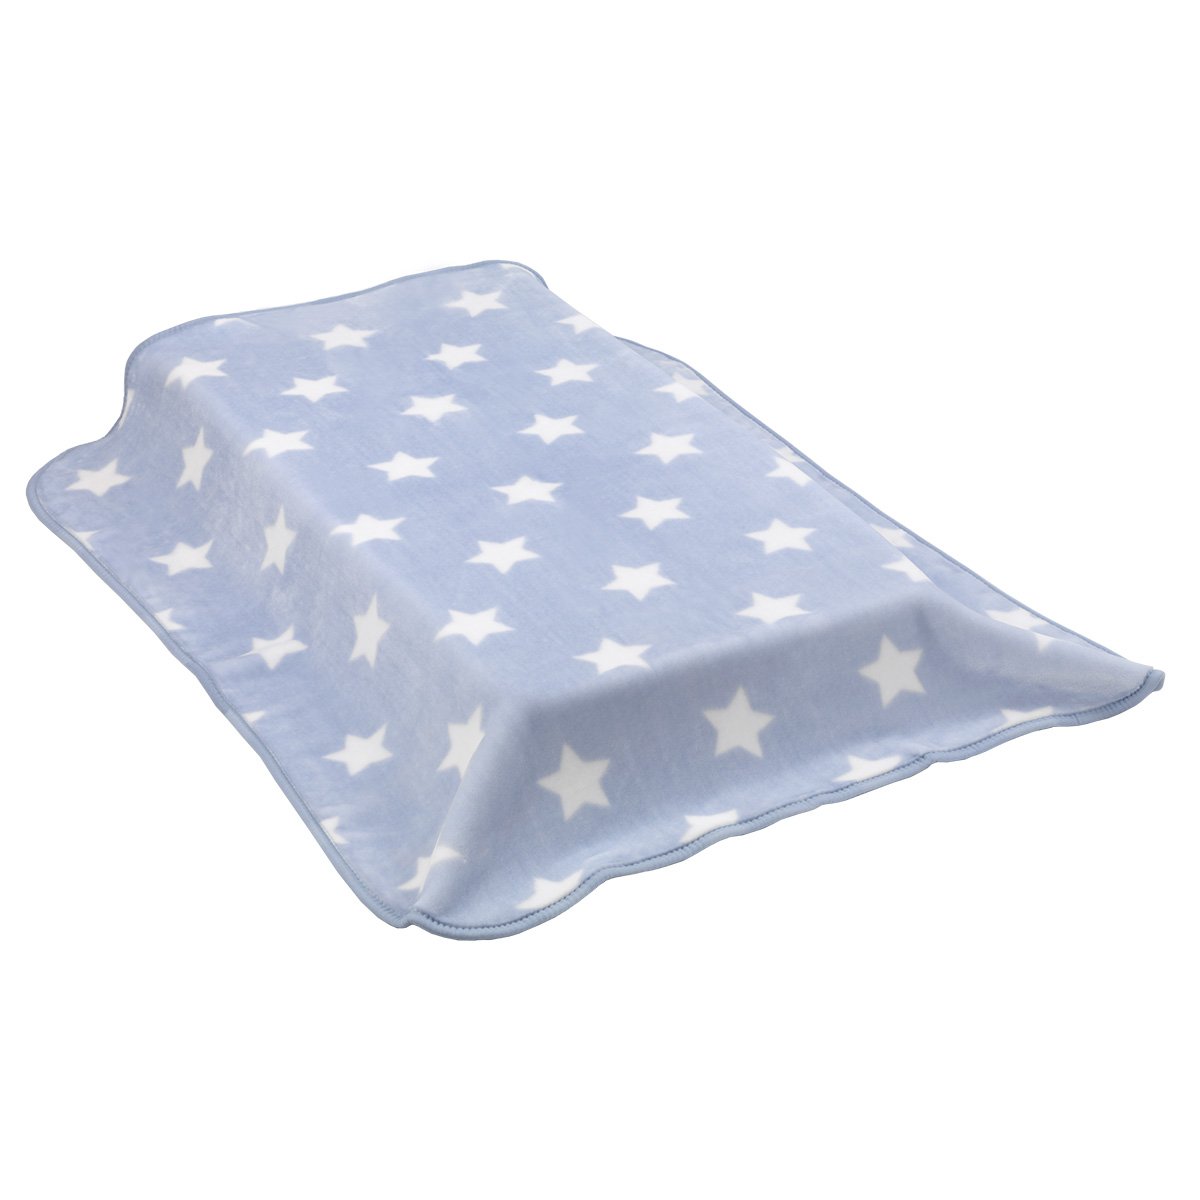 Cambrass 39102 Day, Star Sky Blue Blanket Bed 110 x 140 cm